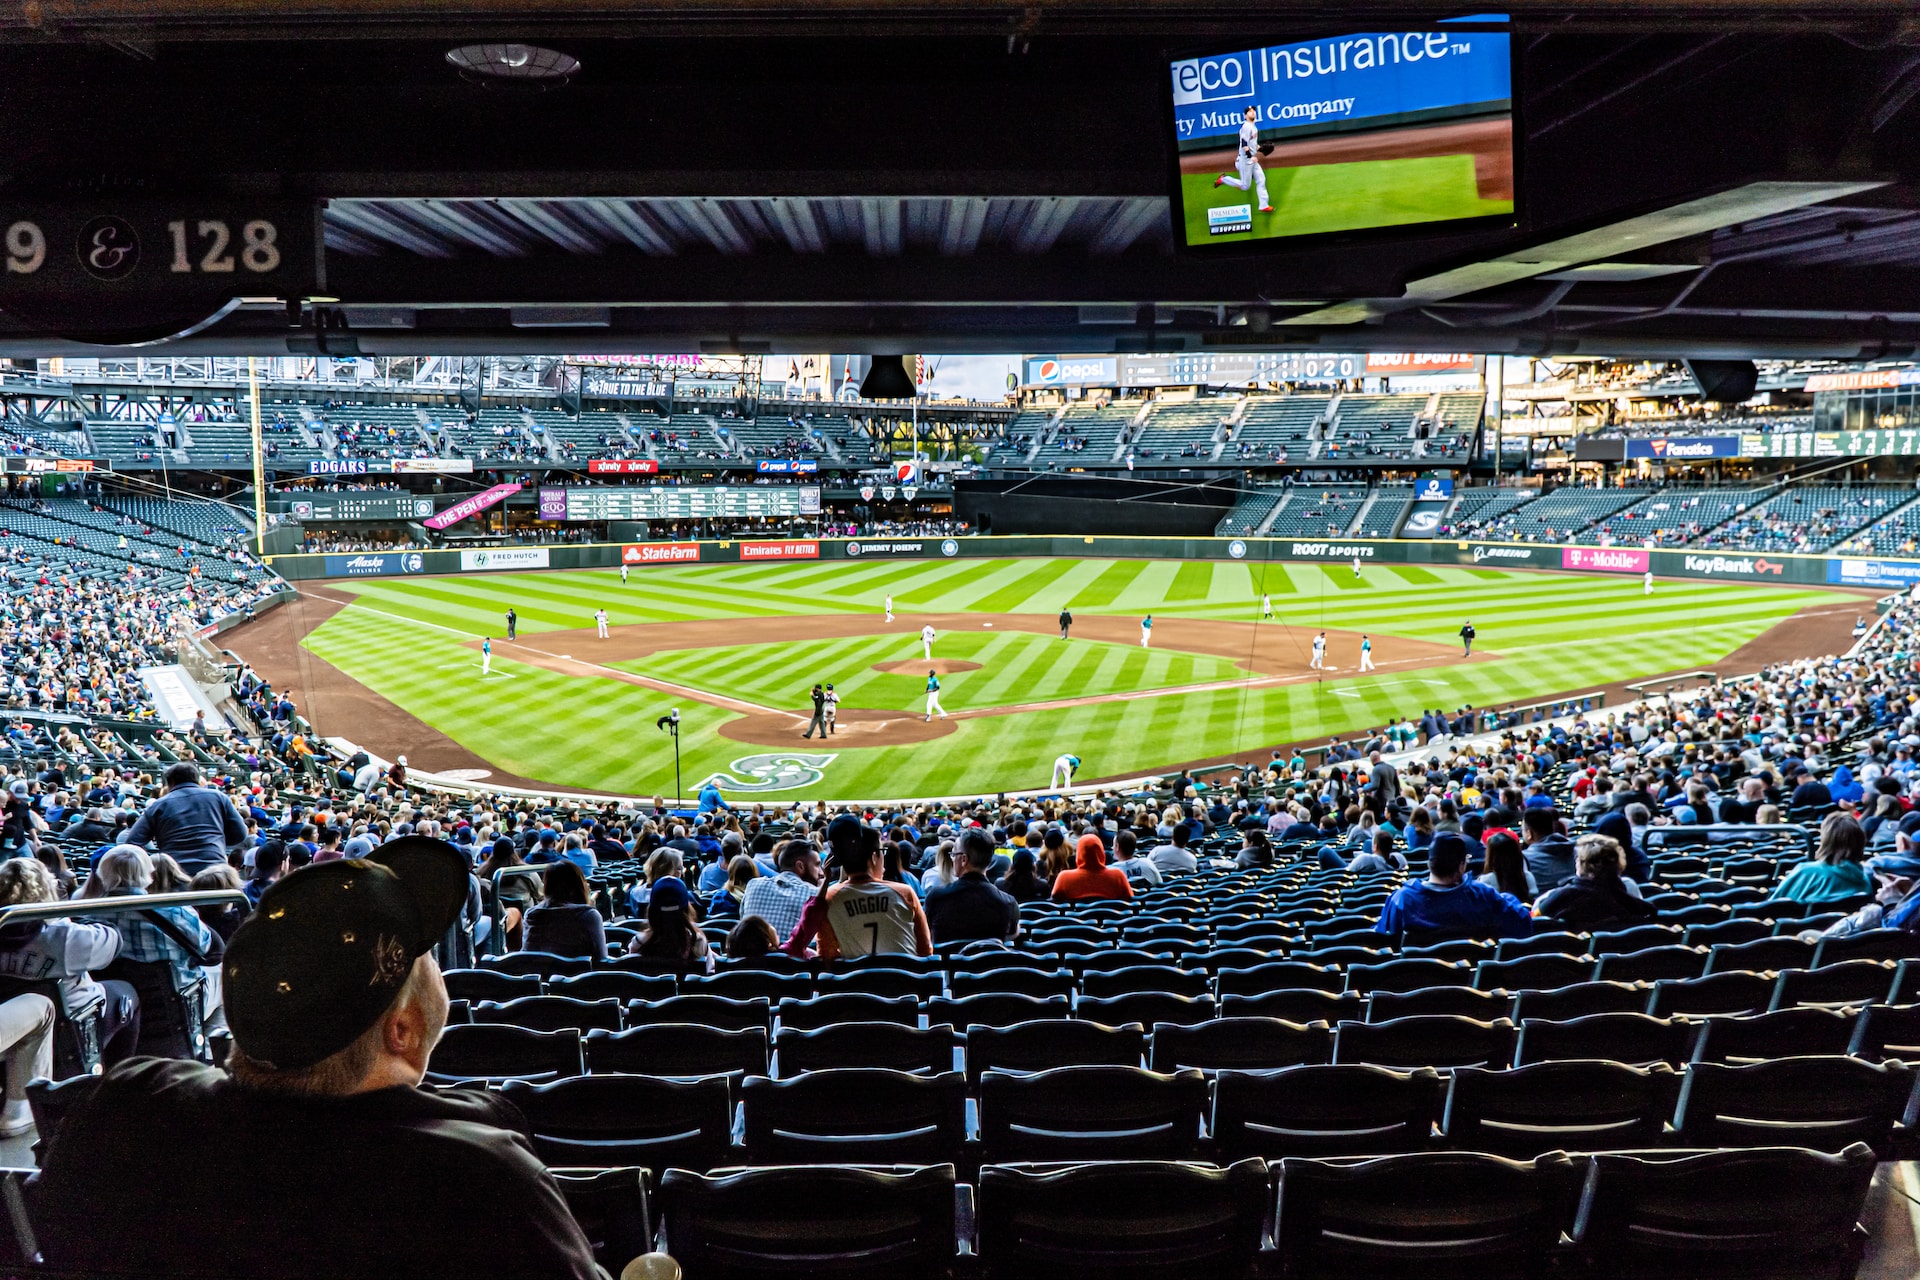 A photo of T-Mobile Park during a Mariners baseball game, taken from under the overhang on the lower level.